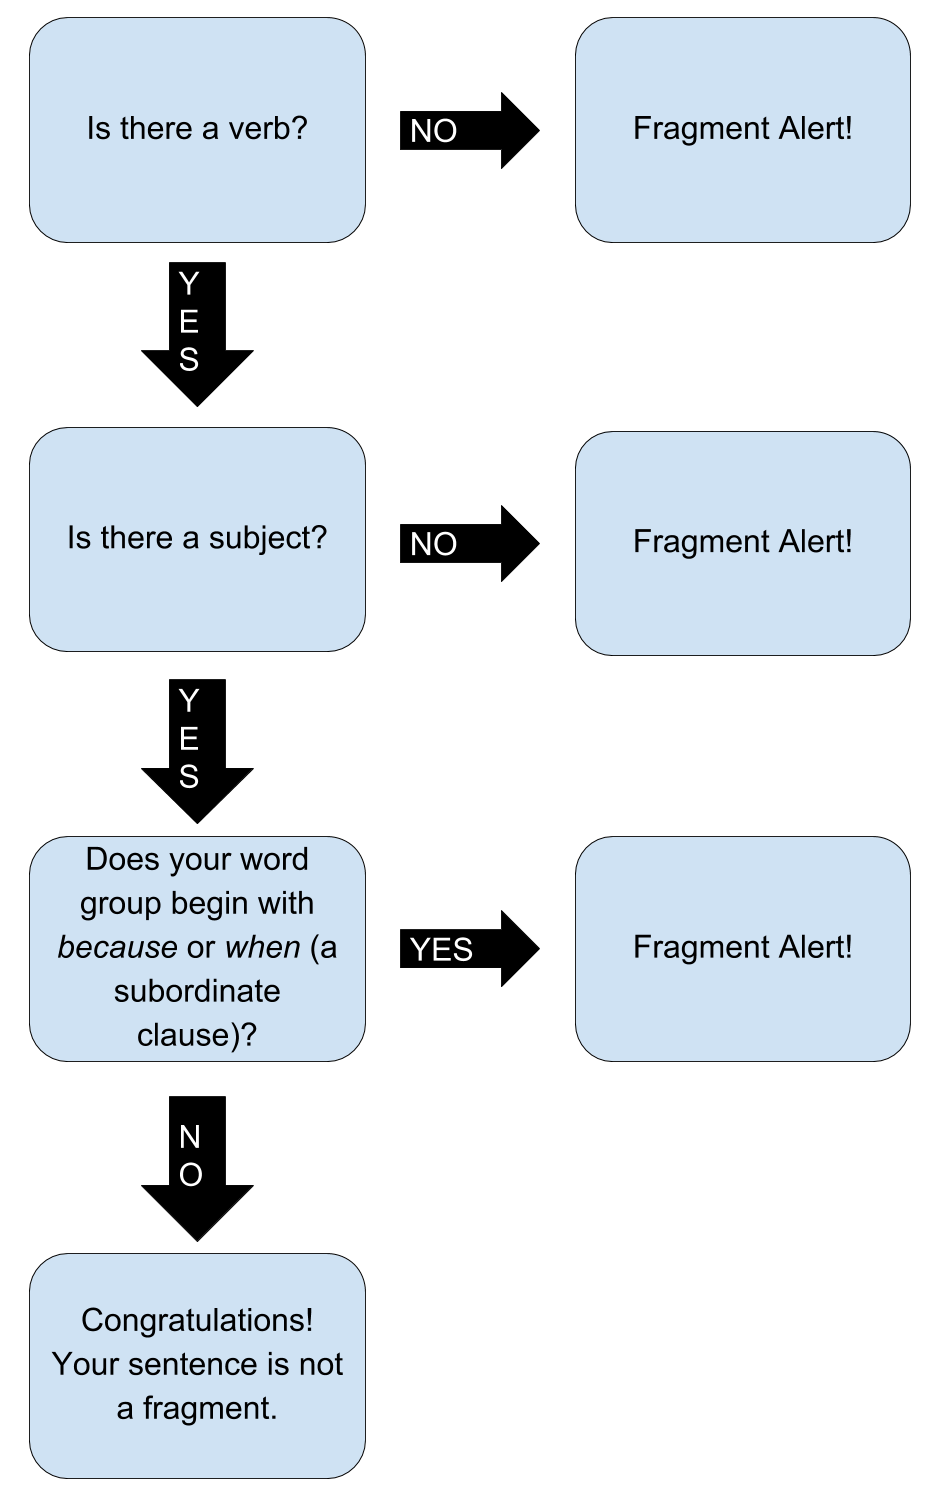 Is there a verb? If no, fragment alert! If yes, Is there a subject? If no, fragment alert! If yes, Does your word group begin with because or when (a subordinate clause)?  If yes, fragment alert! If no, Congratulations! Your sentence is not a fragment.